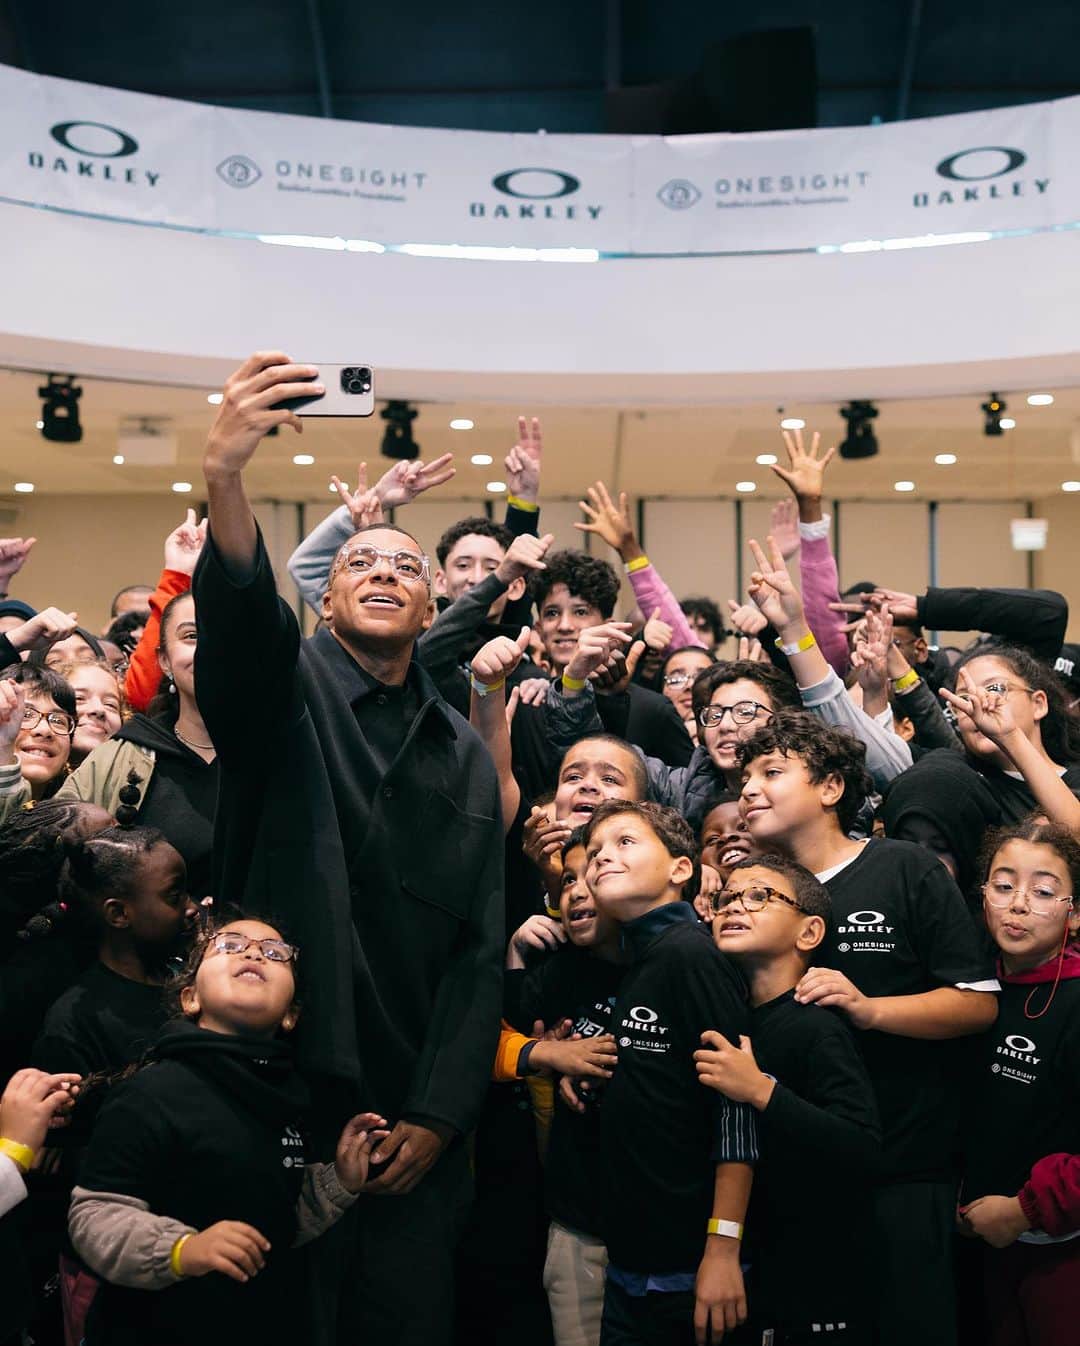 OAKLEYのインスタグラム：「A very special day with a very special athlete. Thanks for joining us, @k.mbappe and @inspiredbykm98, and for partnering with us to spread the word about the importance of vision care and inspiring the next generation. Together with @onesight, we won't stop until the world can see. #BeWhoYouAre」